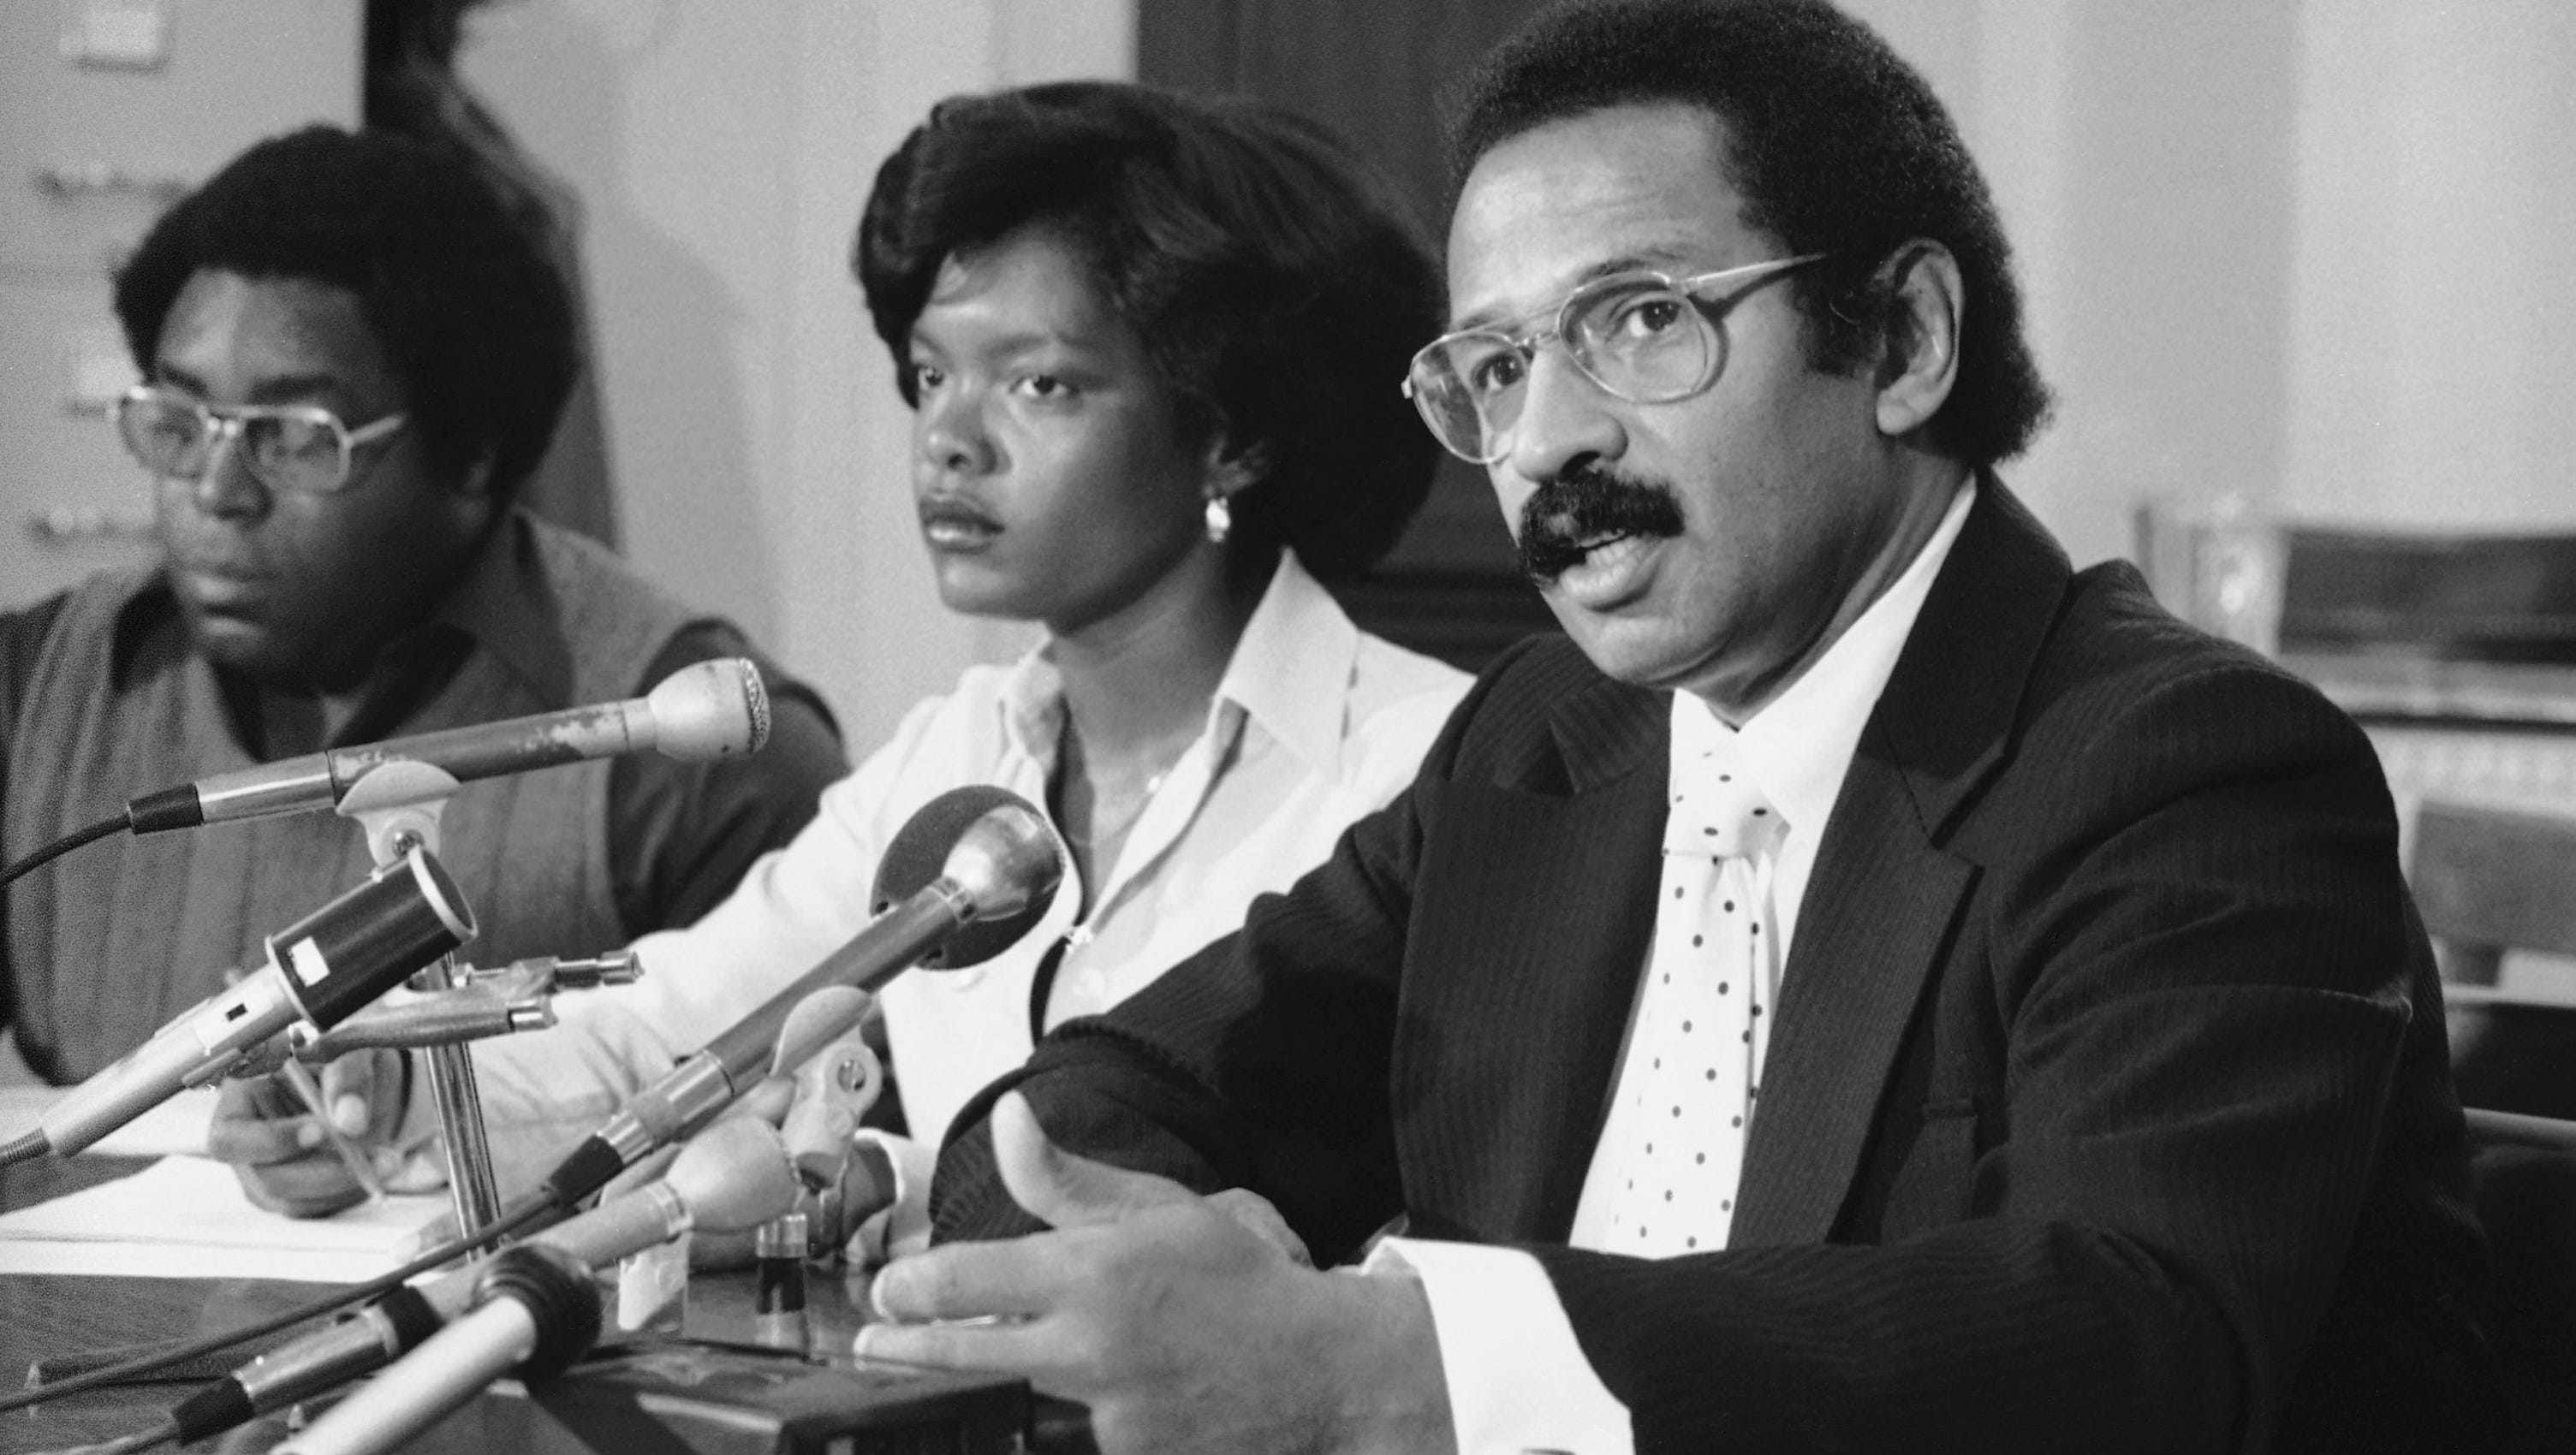 Rep. John Conyers, M-Mich. talks to reporters during a press conference in Washington on Thursday, Oct. 6, 1977.   Conyers called the briefing to announce a national day of protest on the Alan Bakke case. The case, formally Regents of the University of California v. Bakke, ruling in which, on June 28, 1978, the U.S. Supreme Court declared affirmative action constitutional but invalidated the use of racial quotas.